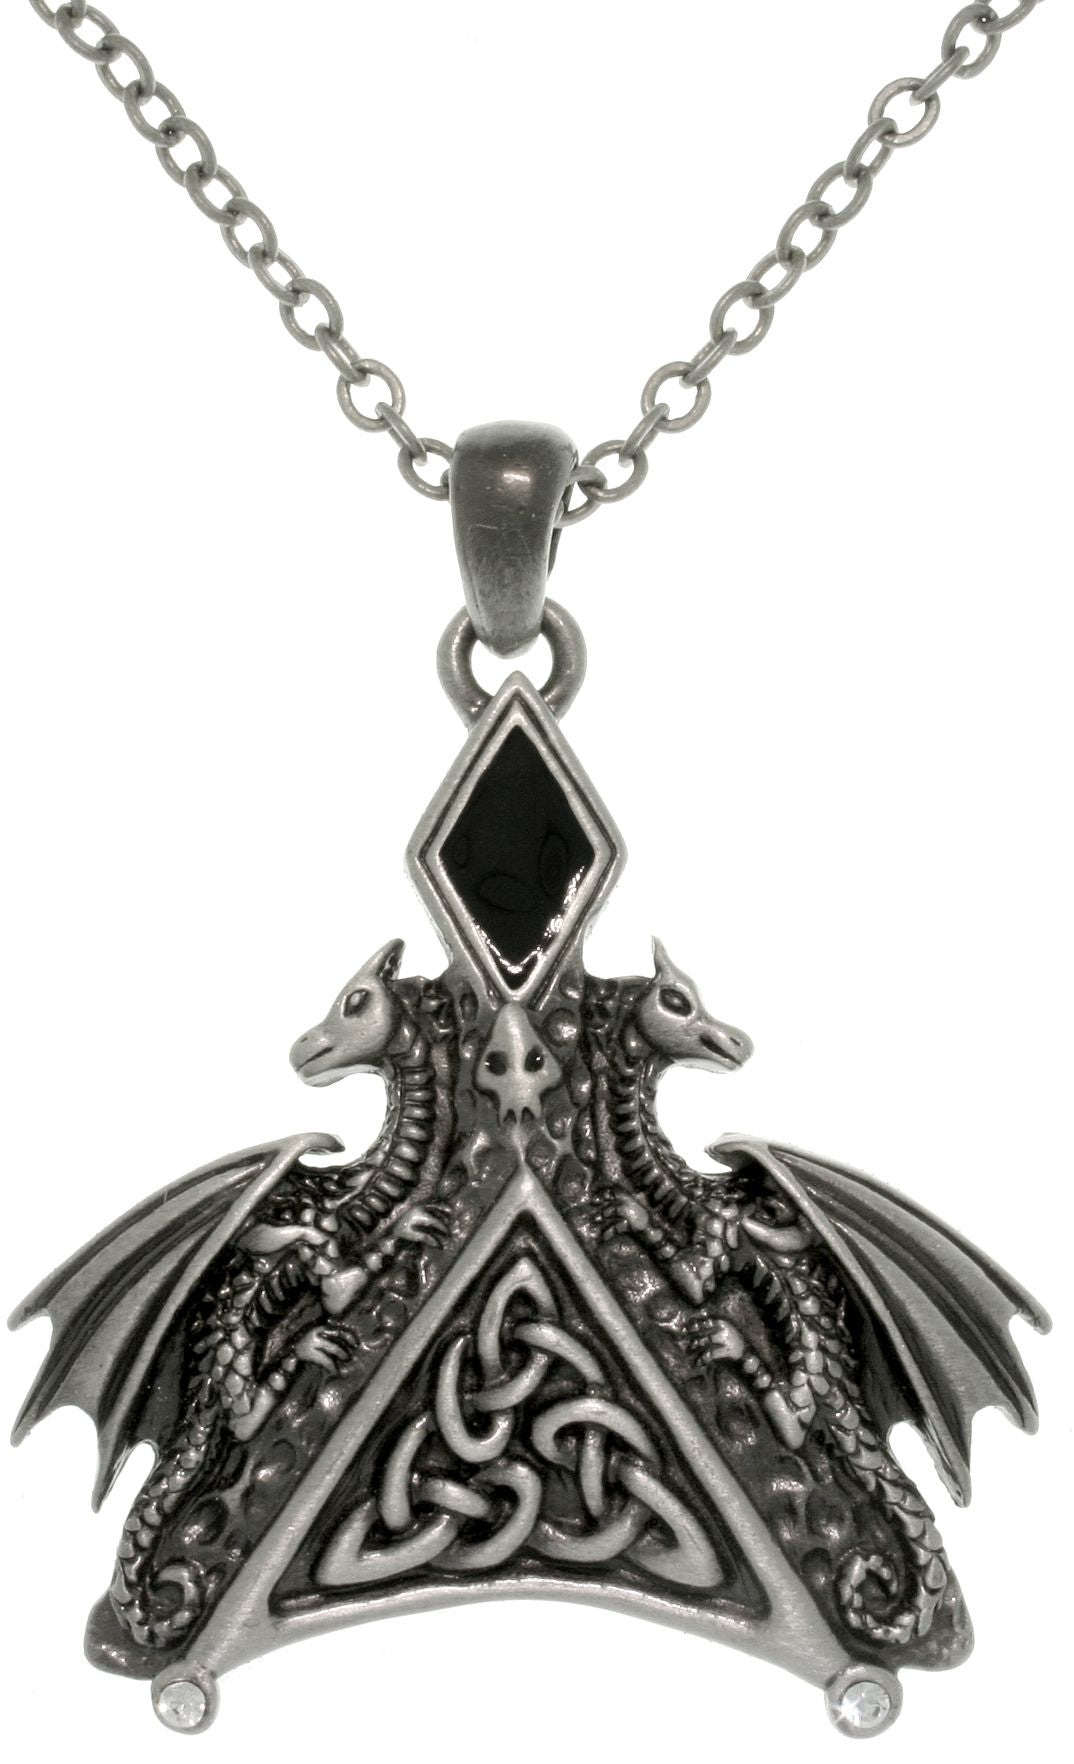 Jewelry Trends Pewter Double Dragon Triangle Celtic Pendant with 25 Inch Chain Necklace